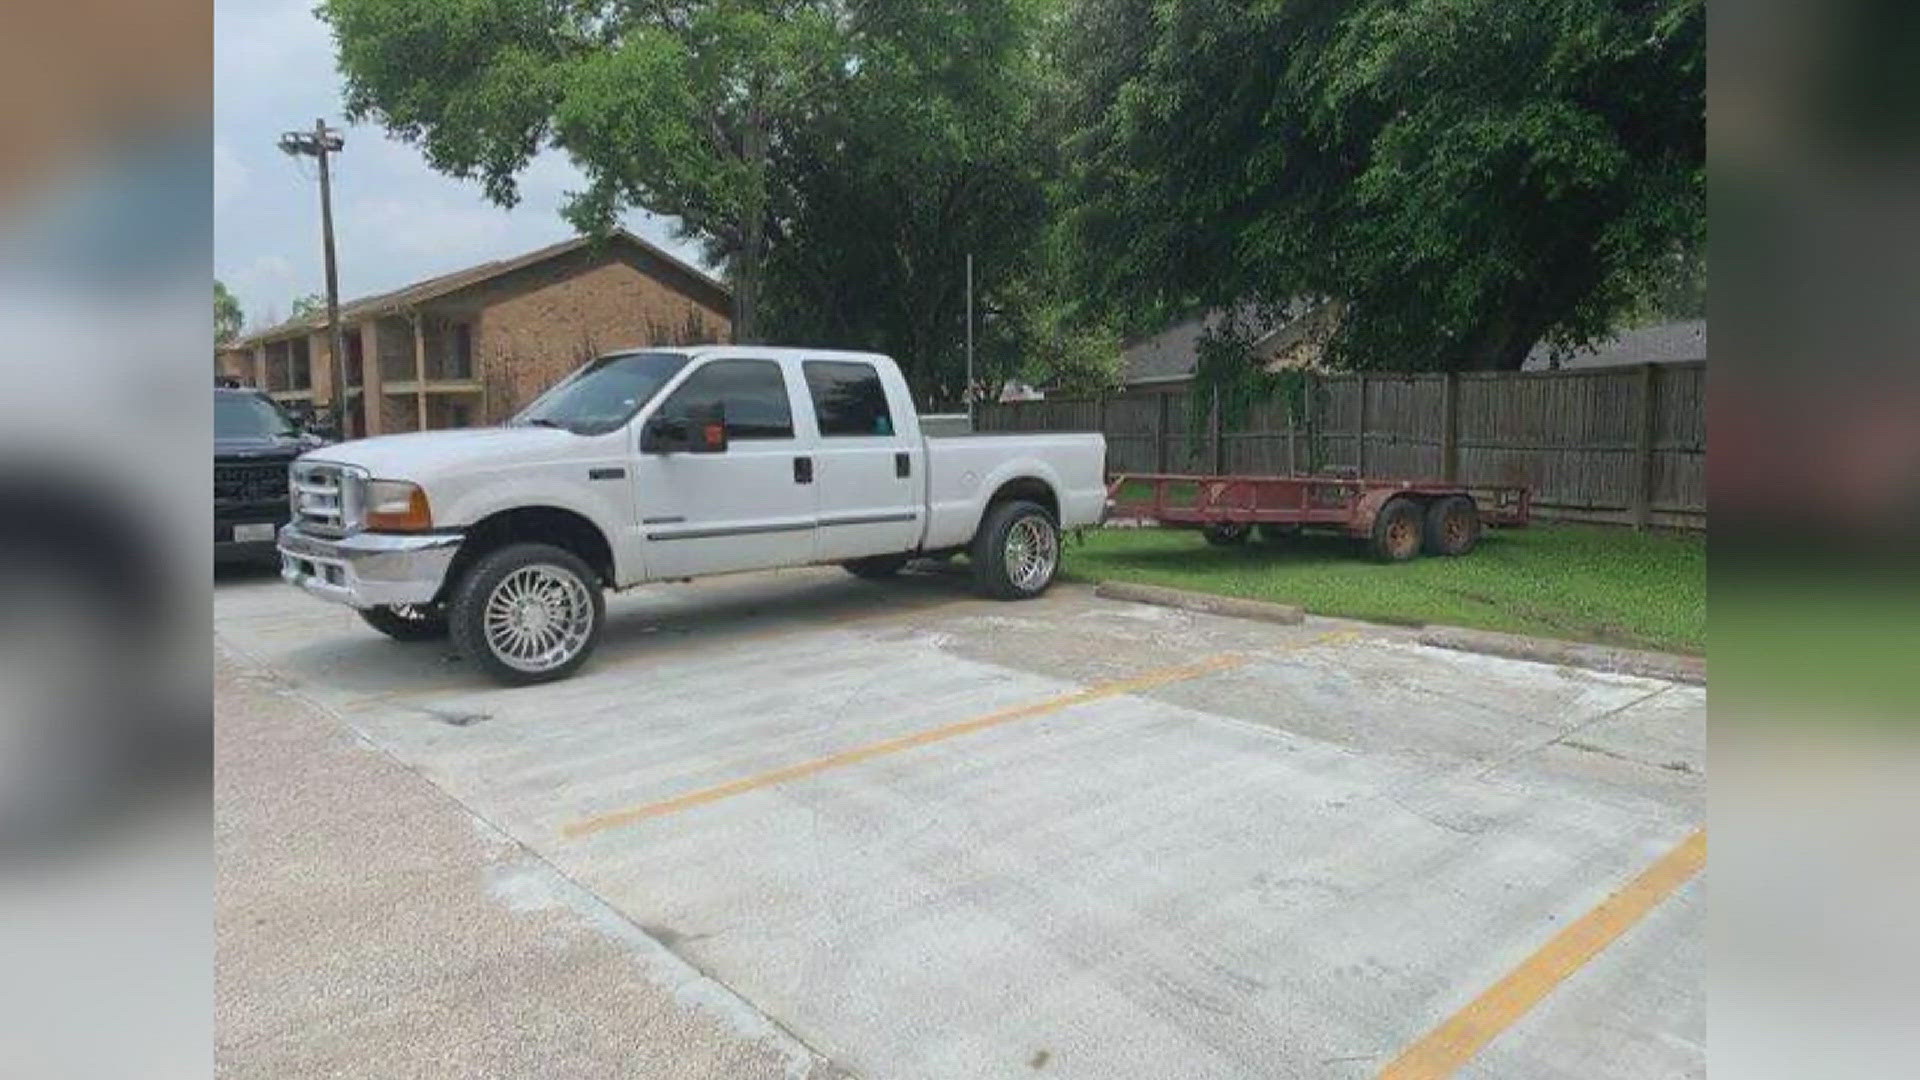 It didn't take long for BPD to track down the vehicle with yet another stolen trailer still in tow. This one had been reported stolen in Beaumont just hours earlier.